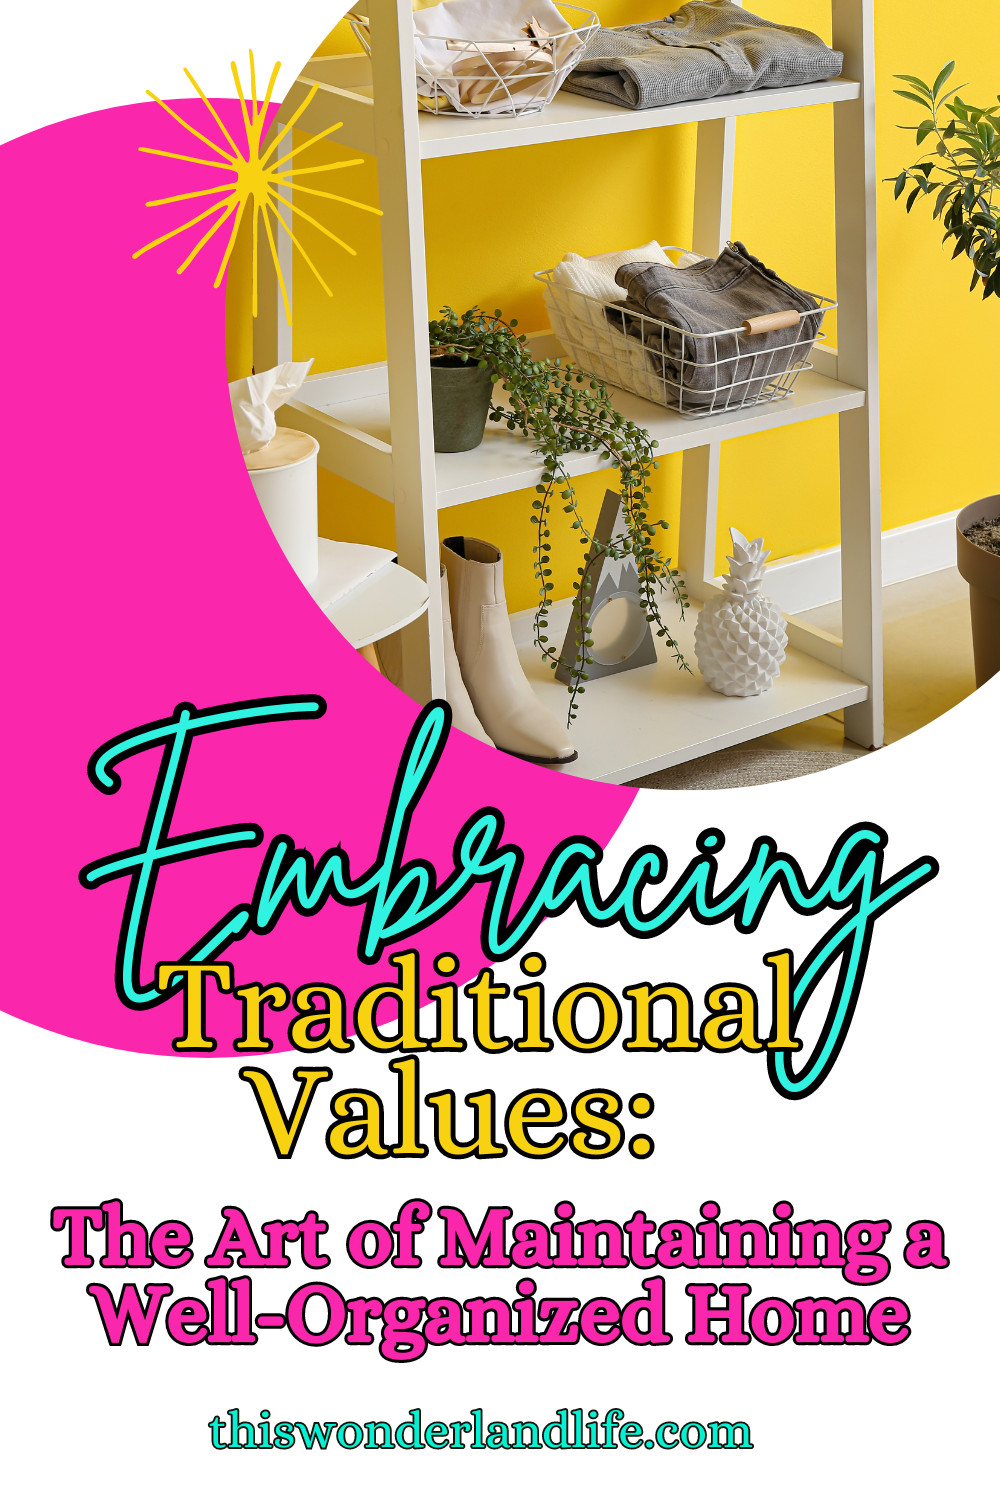 Embracing Traditional Values: The Art of Maintaining a Well-Organized Home